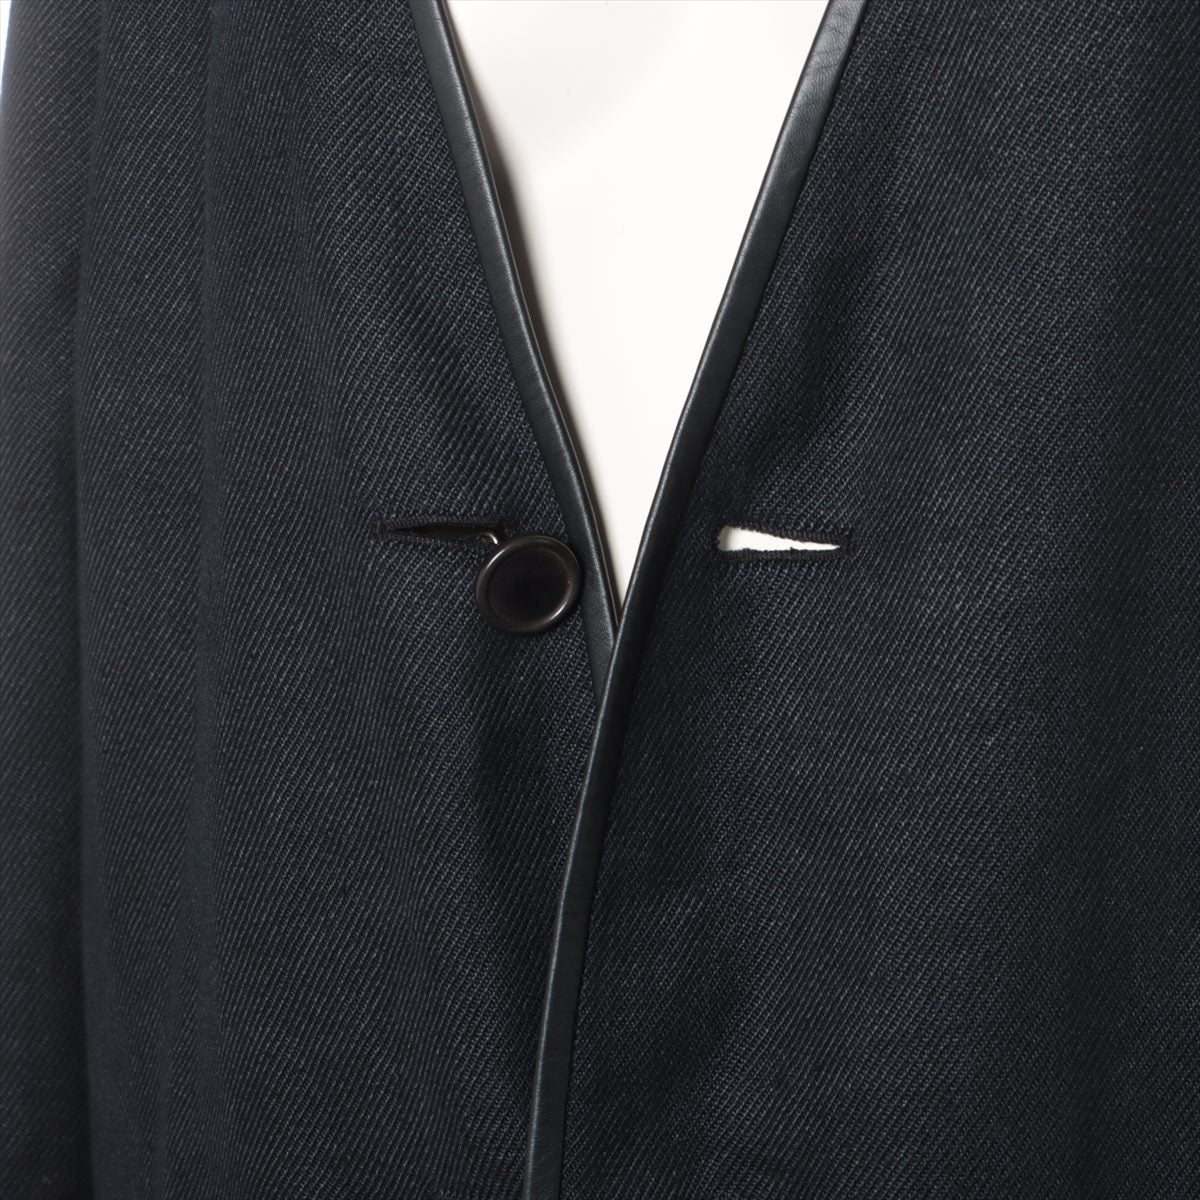 Hermes Margiela Period Linen Jacket 38  Black Third Button Parts able Several s in the Three Halls